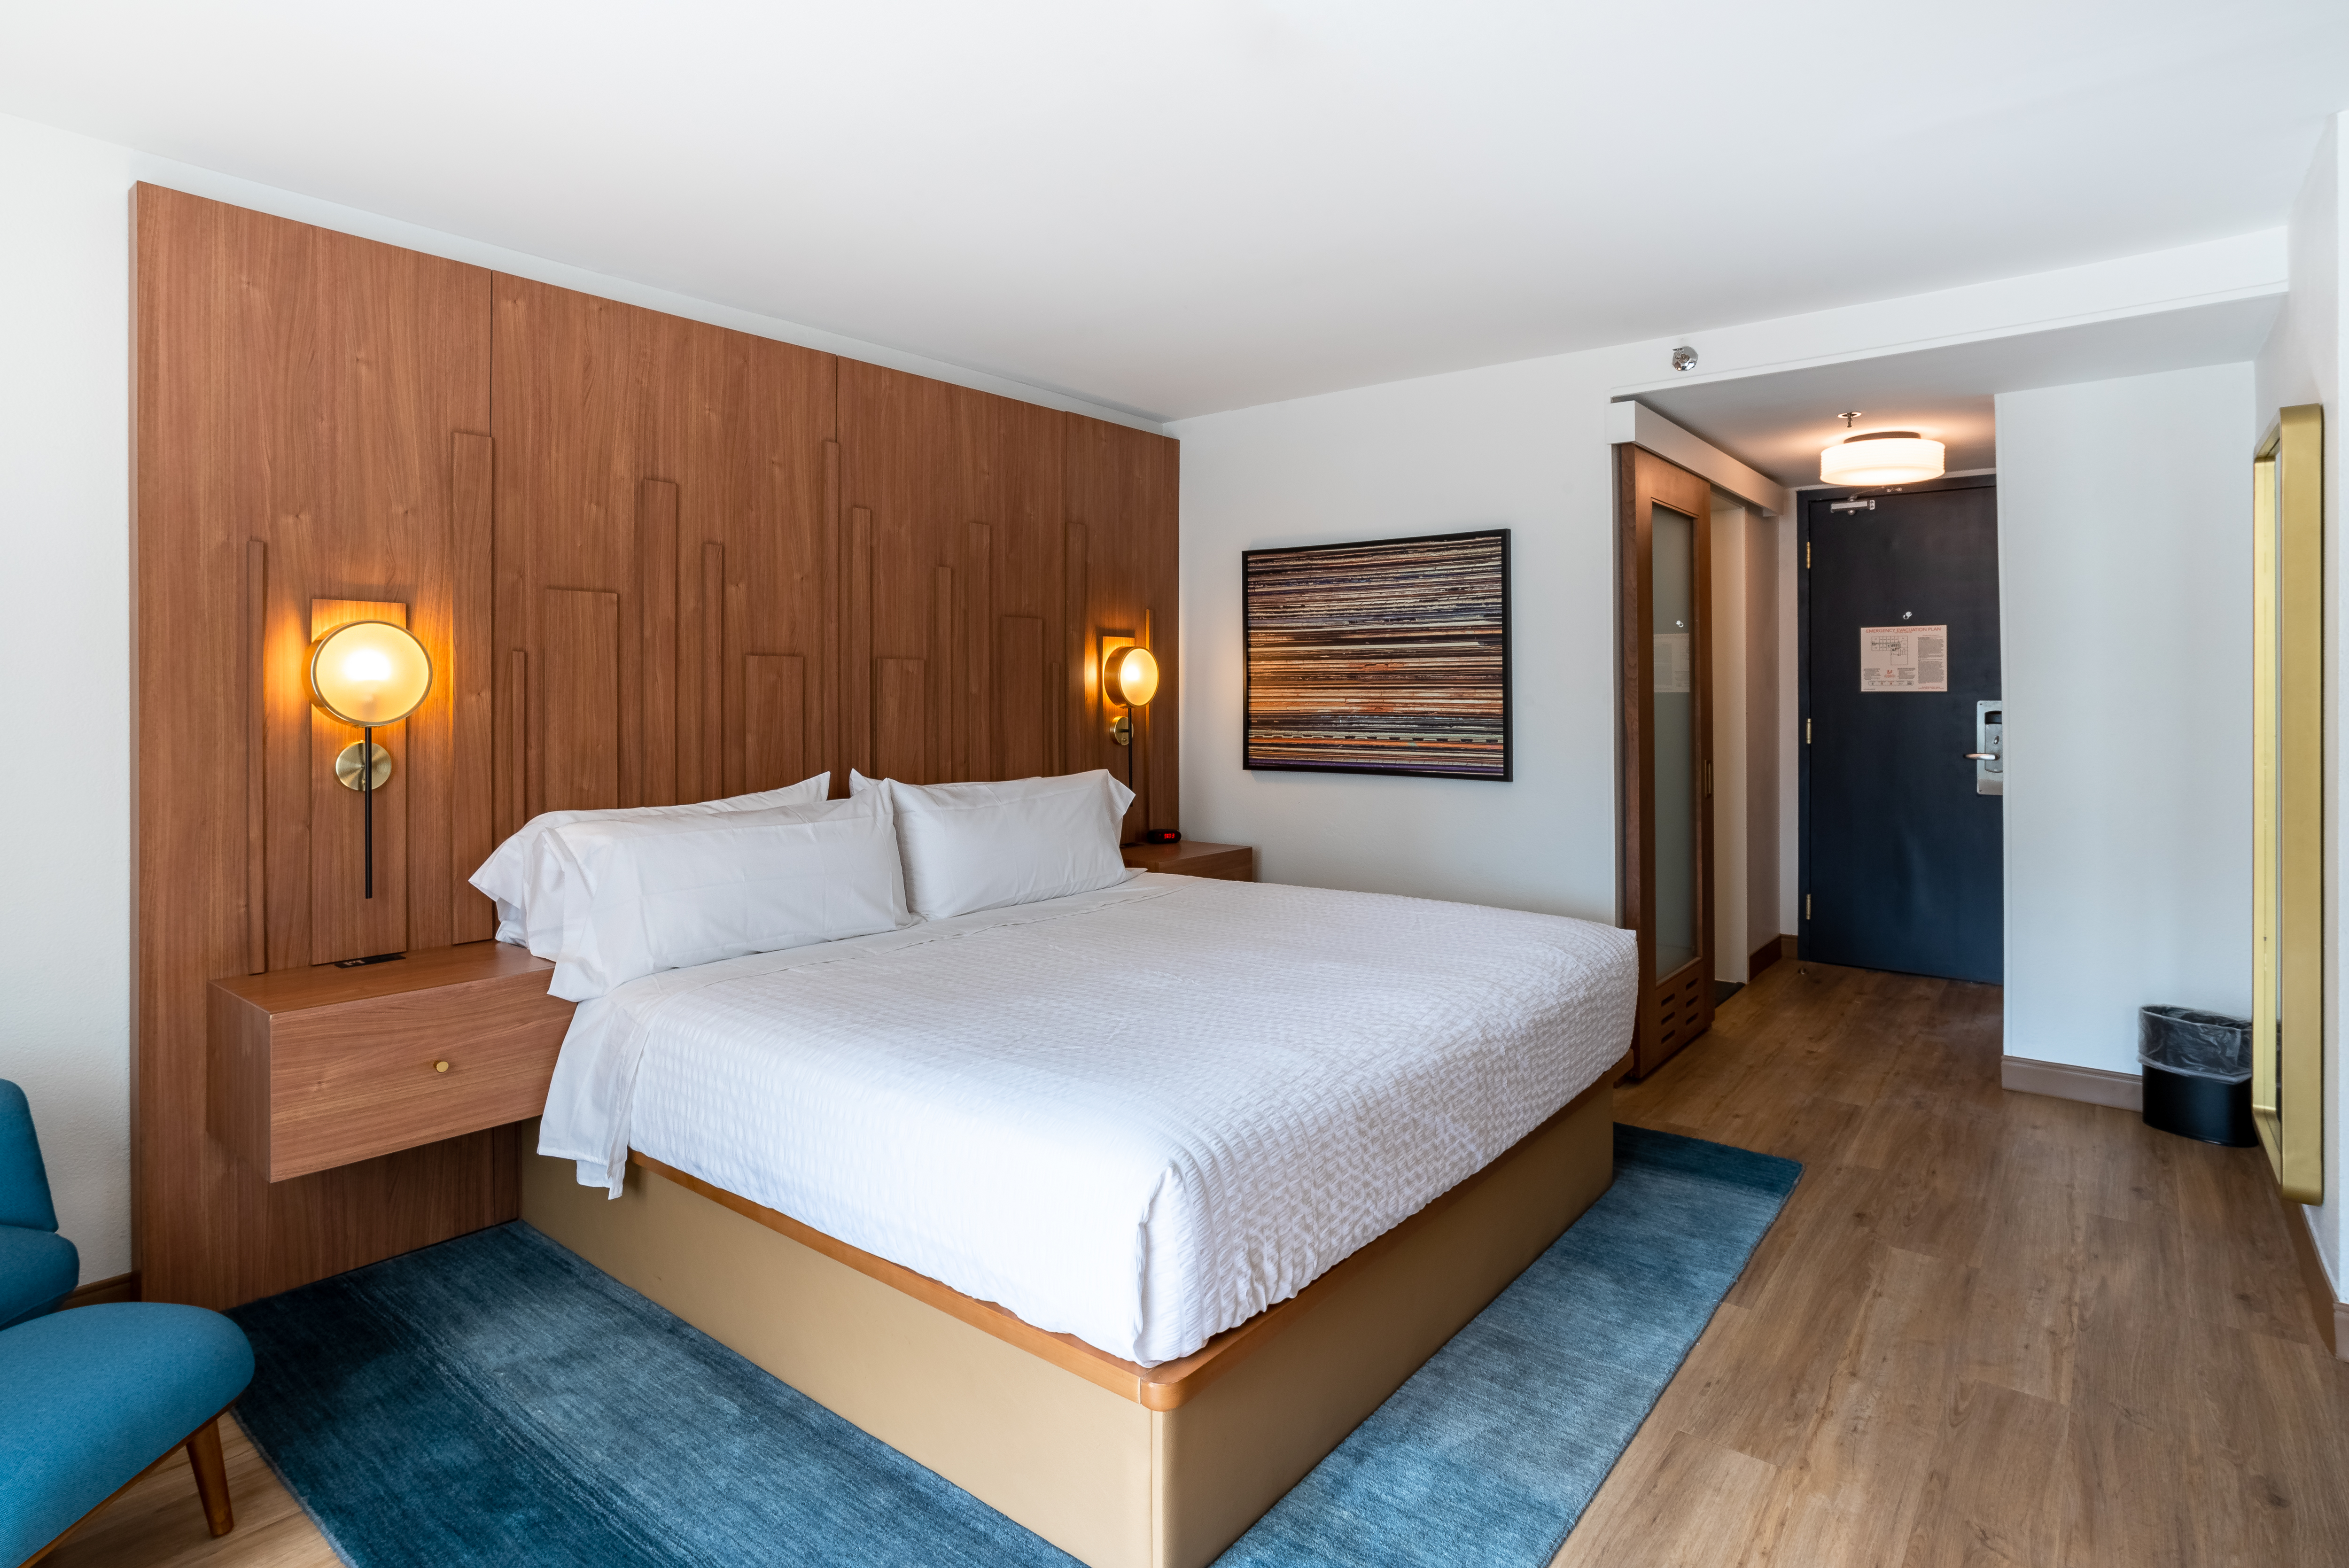 See inside Detroit's new Motown-inspired Hotel Indigo after $10M